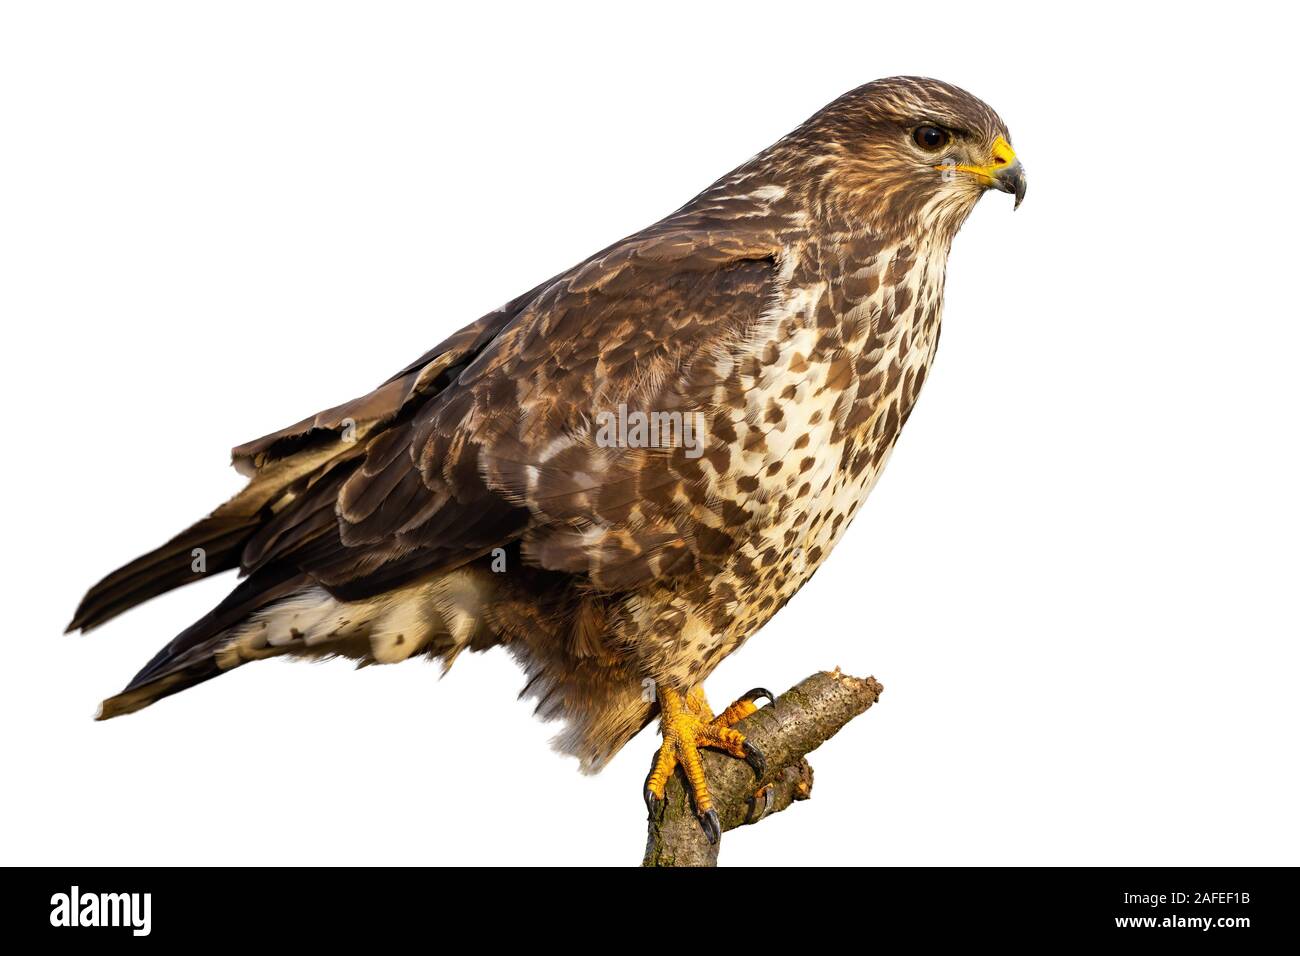 Common buzzard, buteo buteo, sitting perched isolated on white background Stock Photo